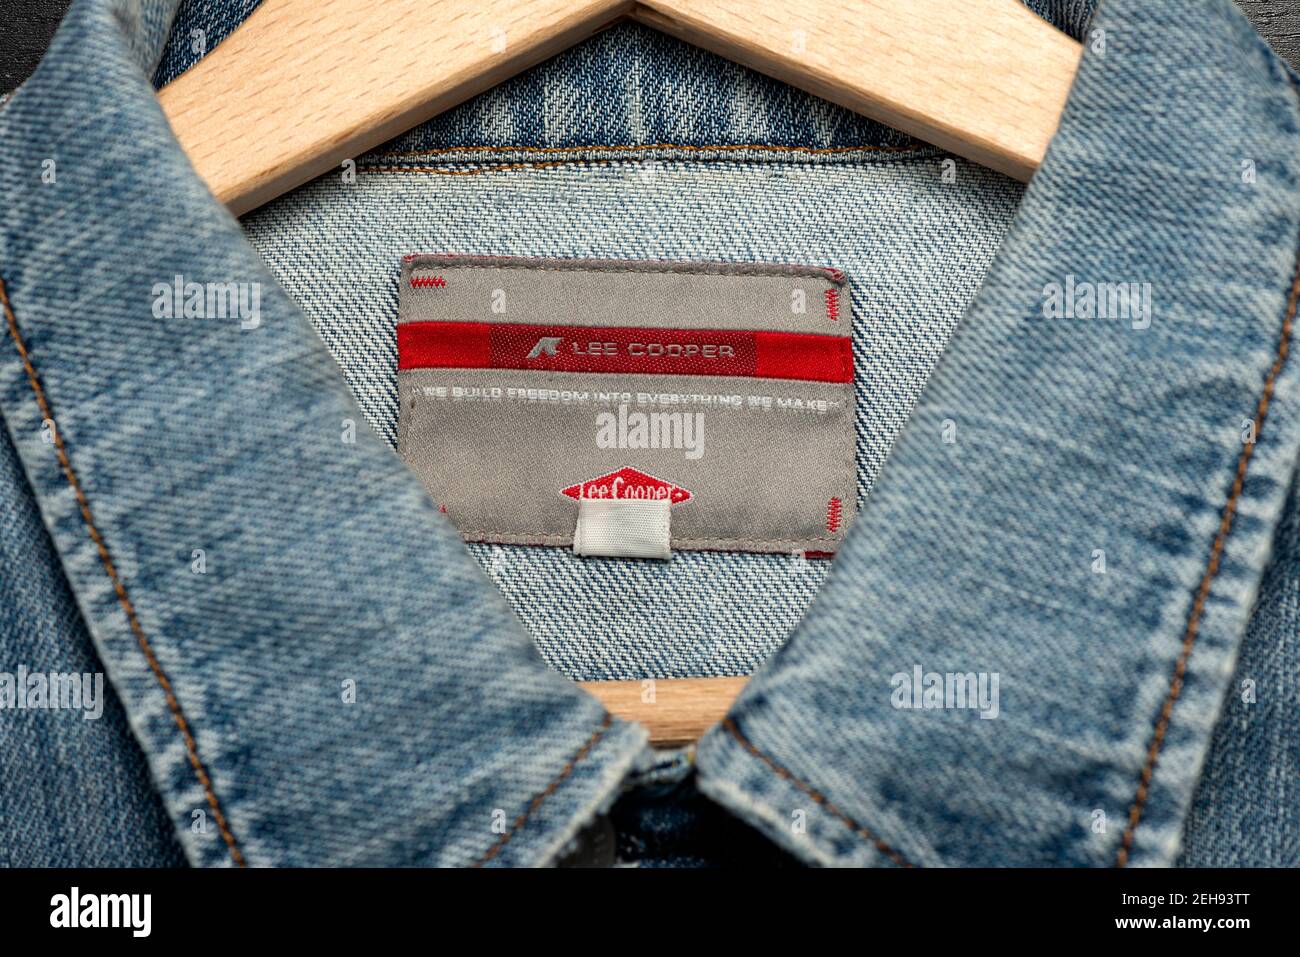 Lee Cooper label with slogan or motto on woman's denim jacket hanging on wooden hanger Stock Photo